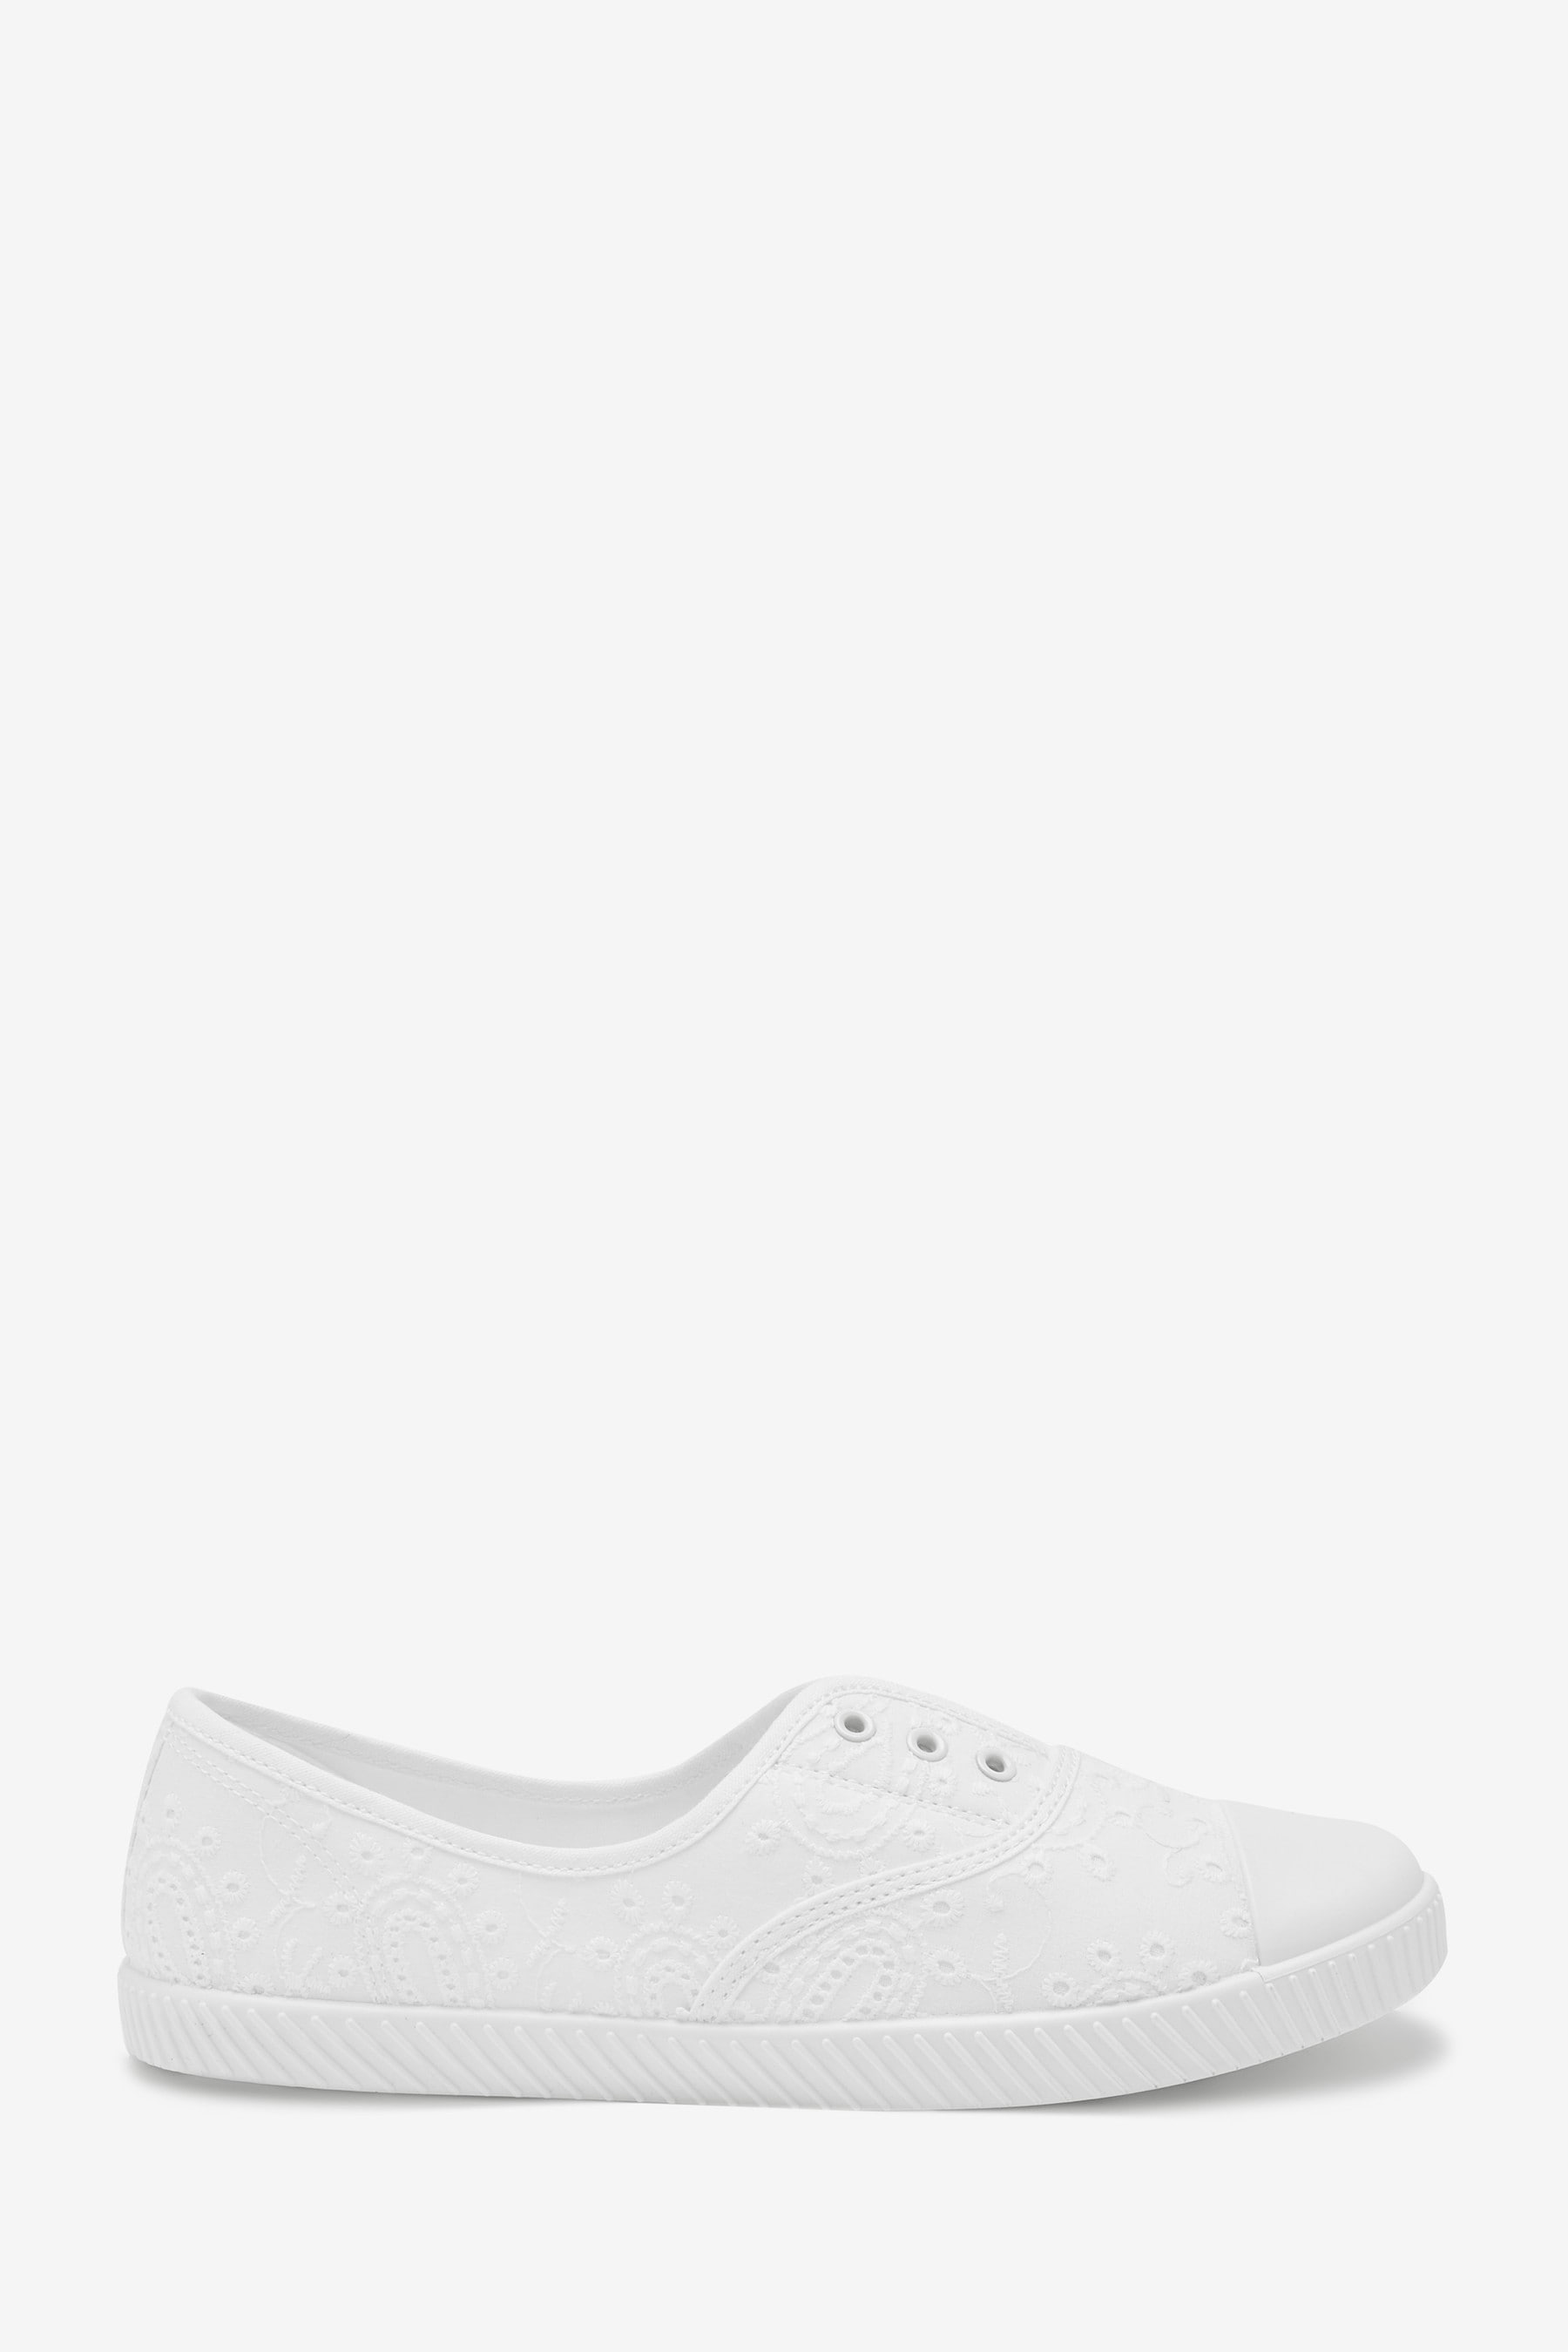 Buy White Slip On Canvas Shoes from the Next UK online shop